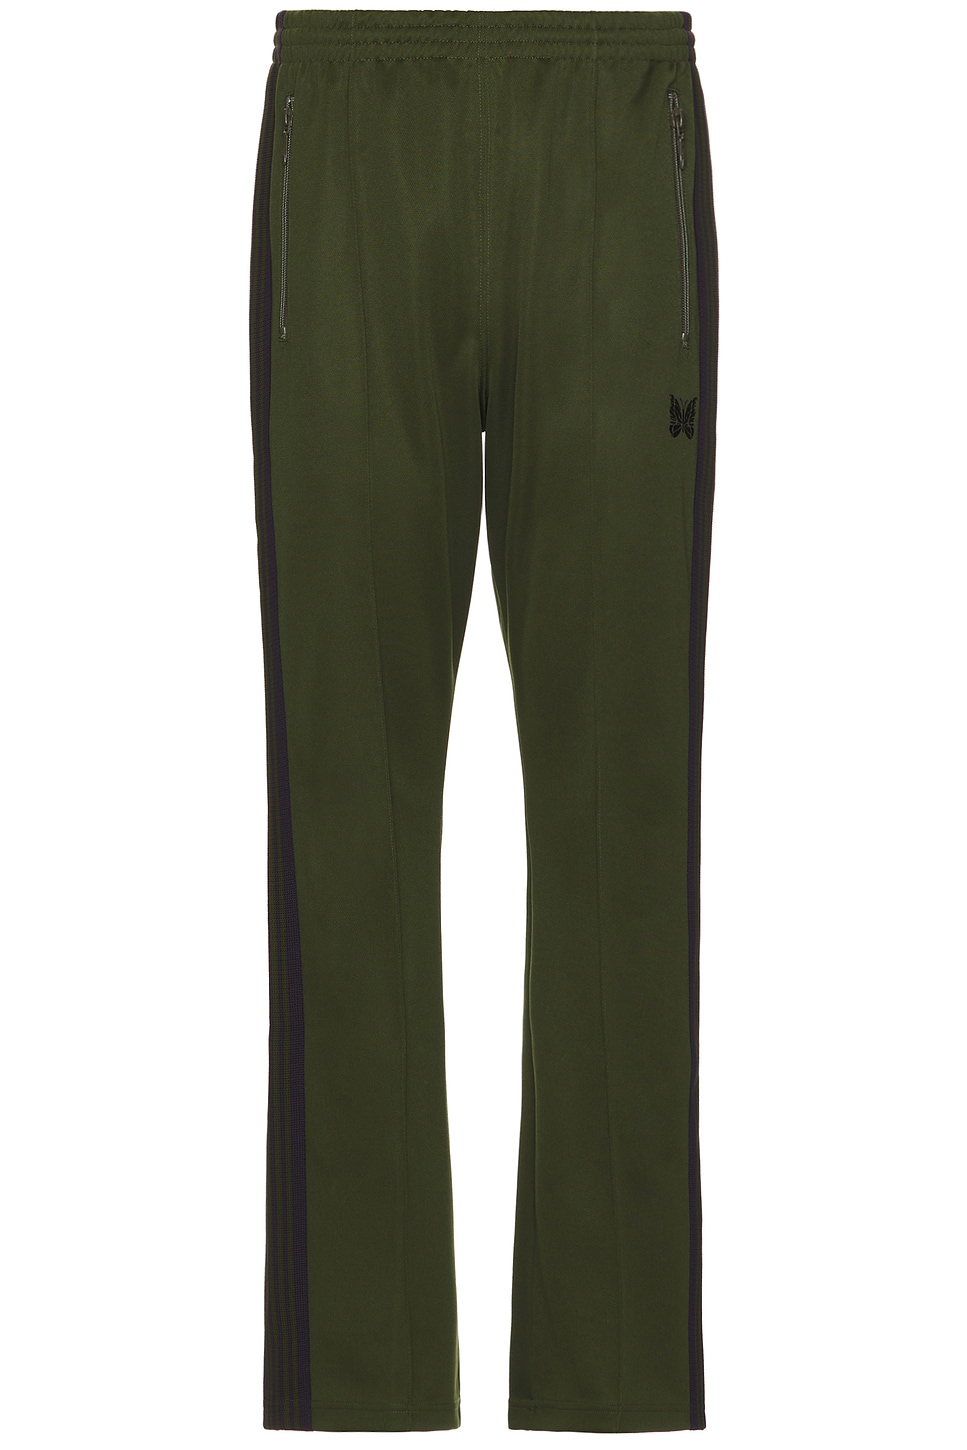 Boot-Cut Track Pant Poly Smooth in Dark Green